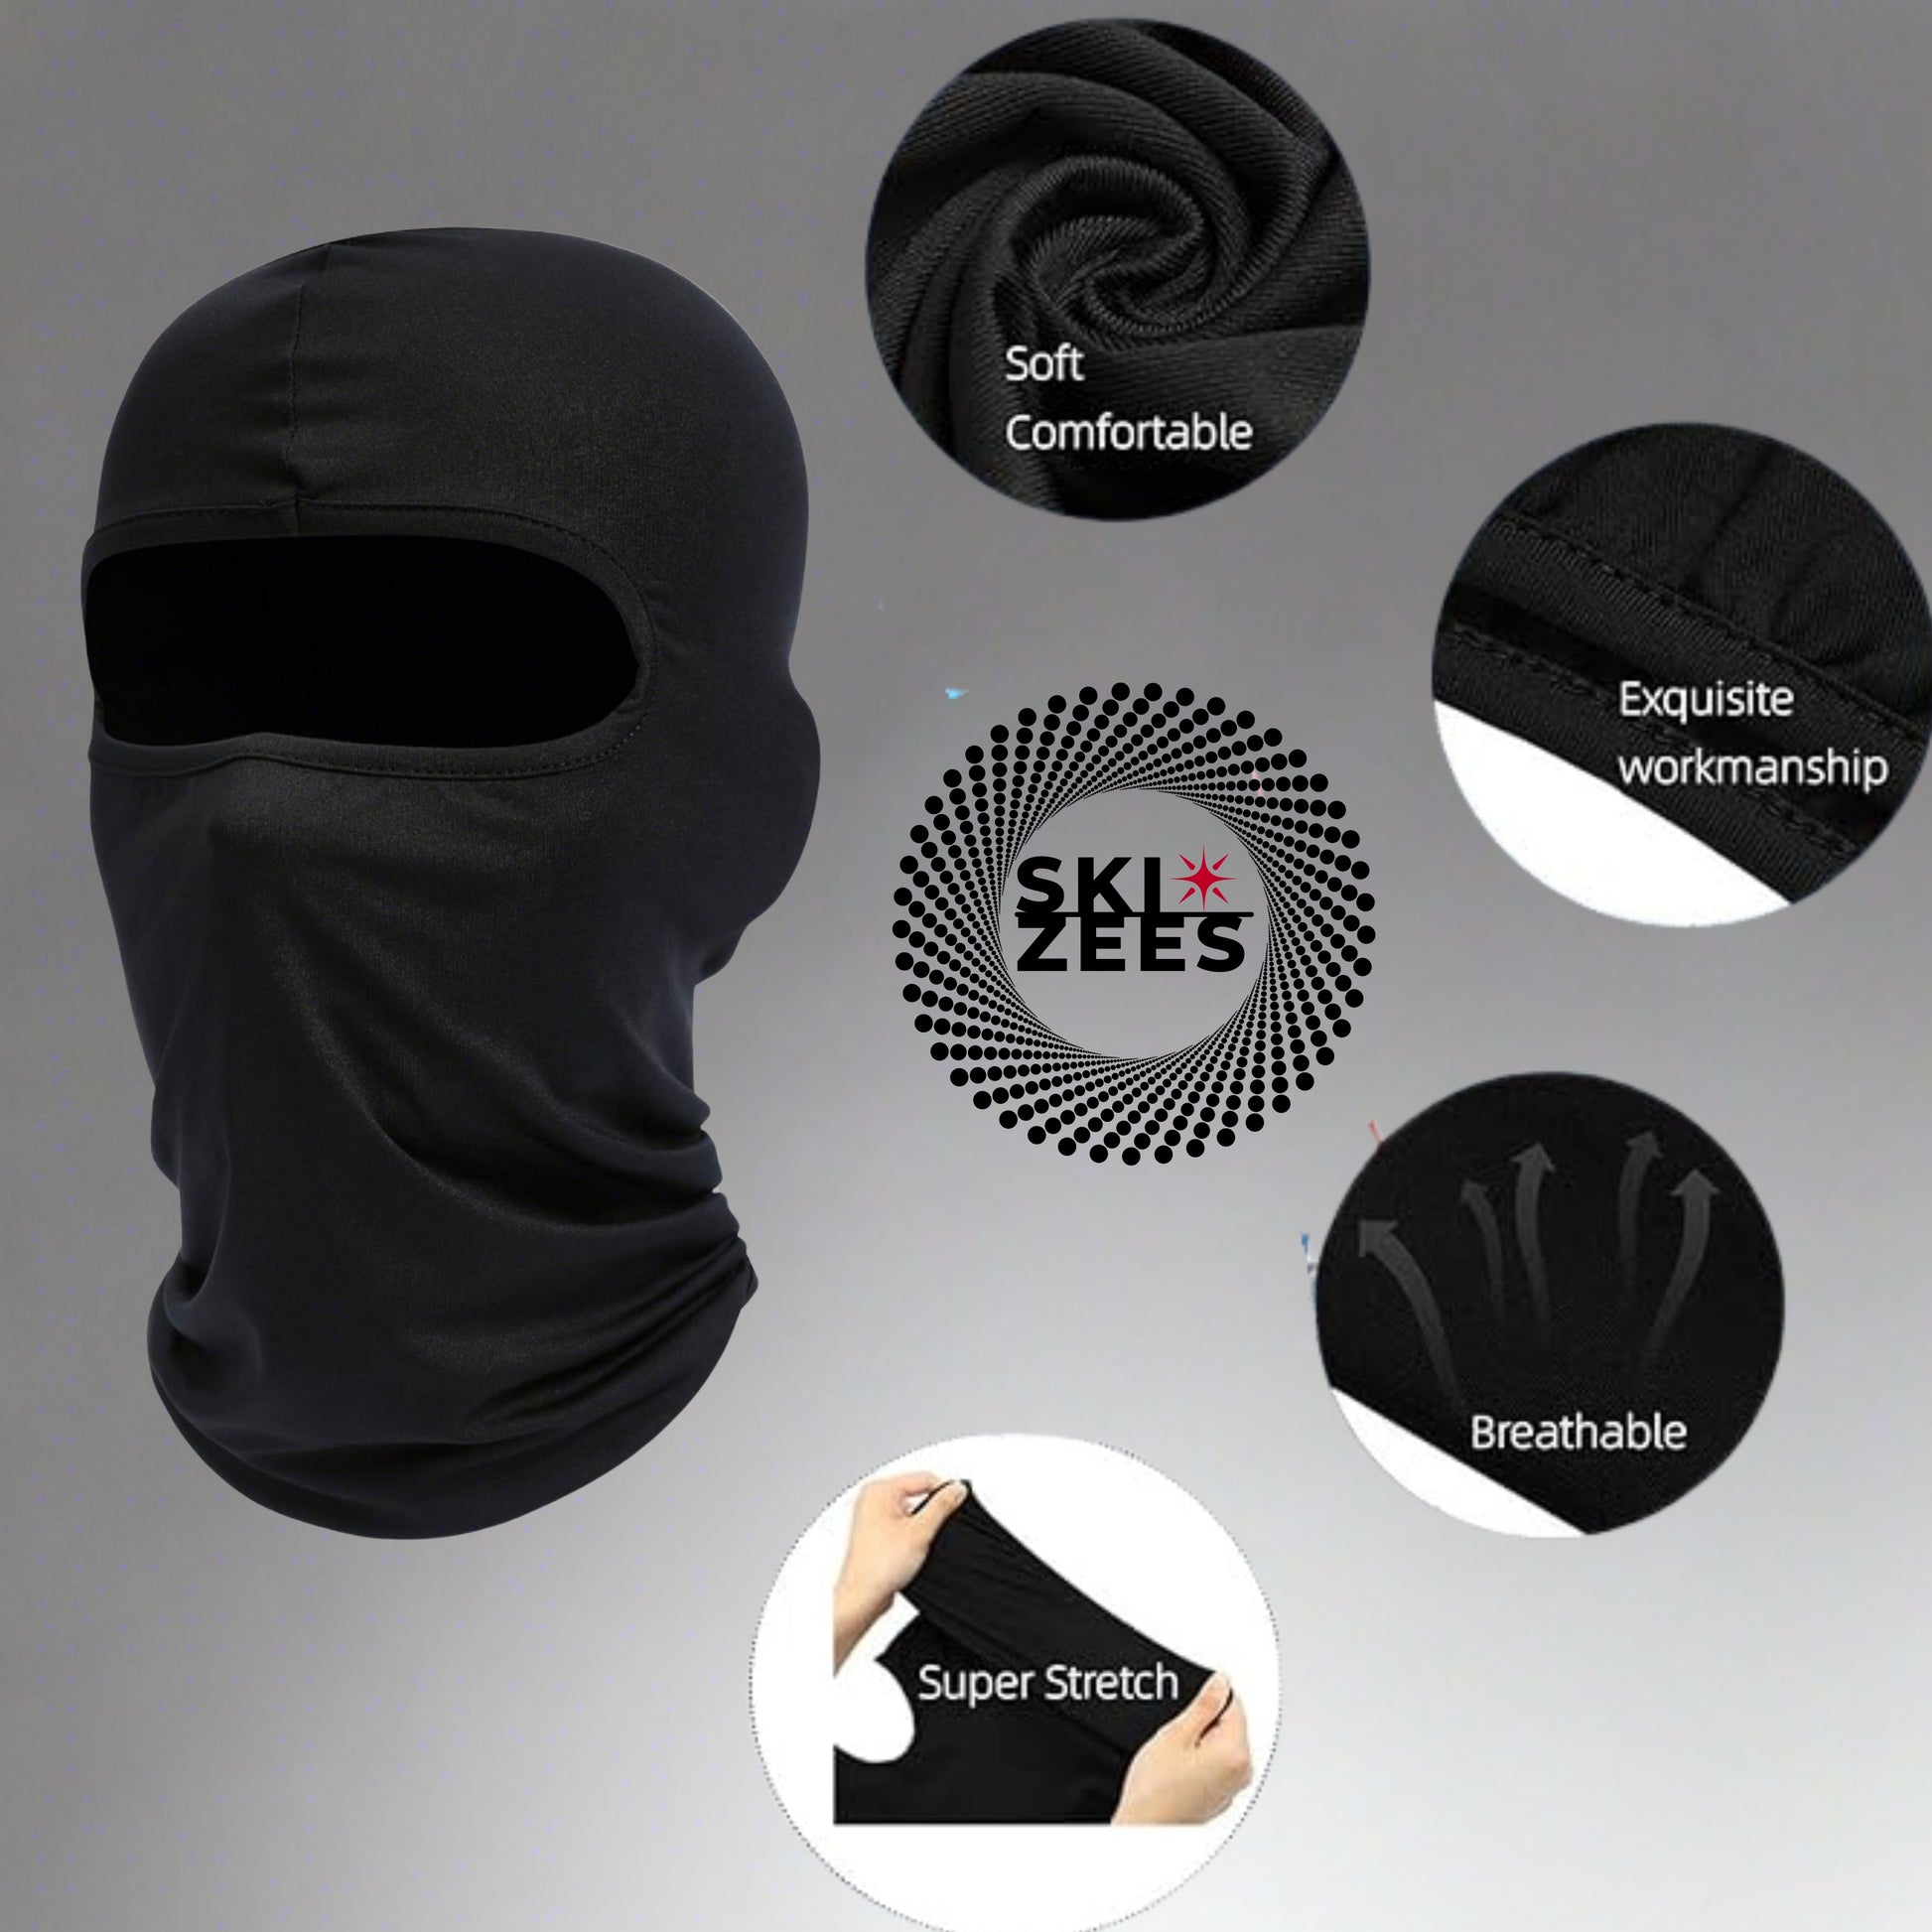 soft comfortable with exquiste workmanship breathable and has super stretch balaclava